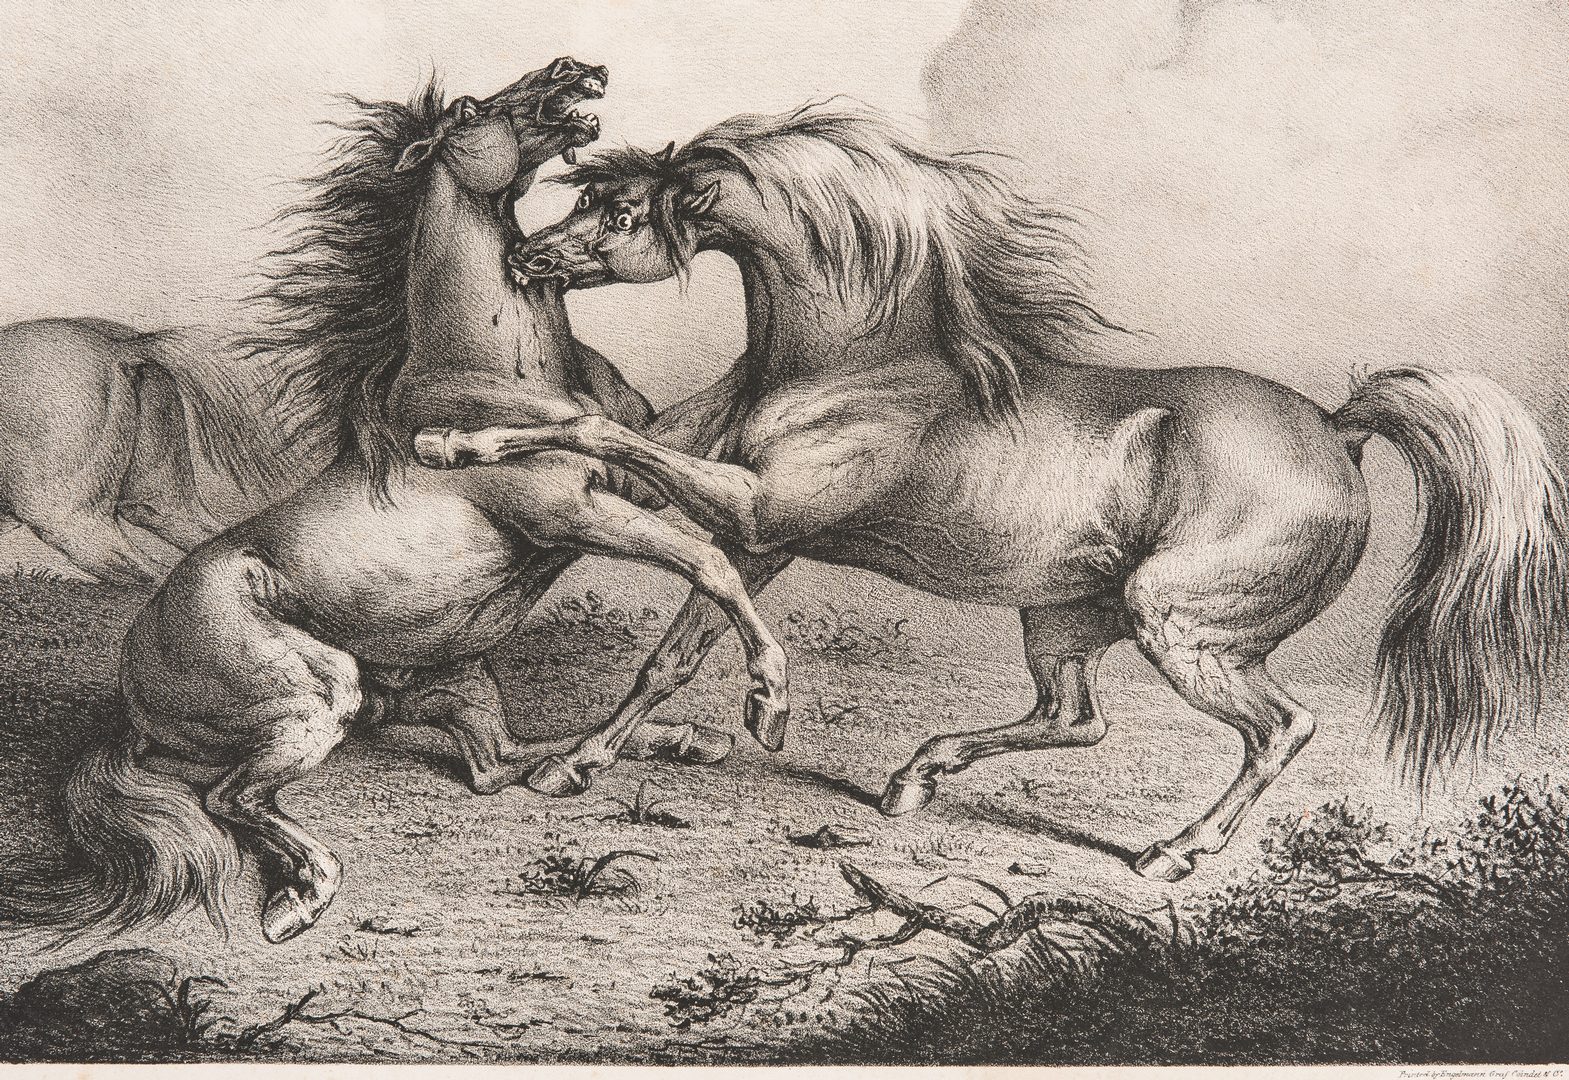 Lot 117: 1827 Folio of horse prints: Passions of the Horse